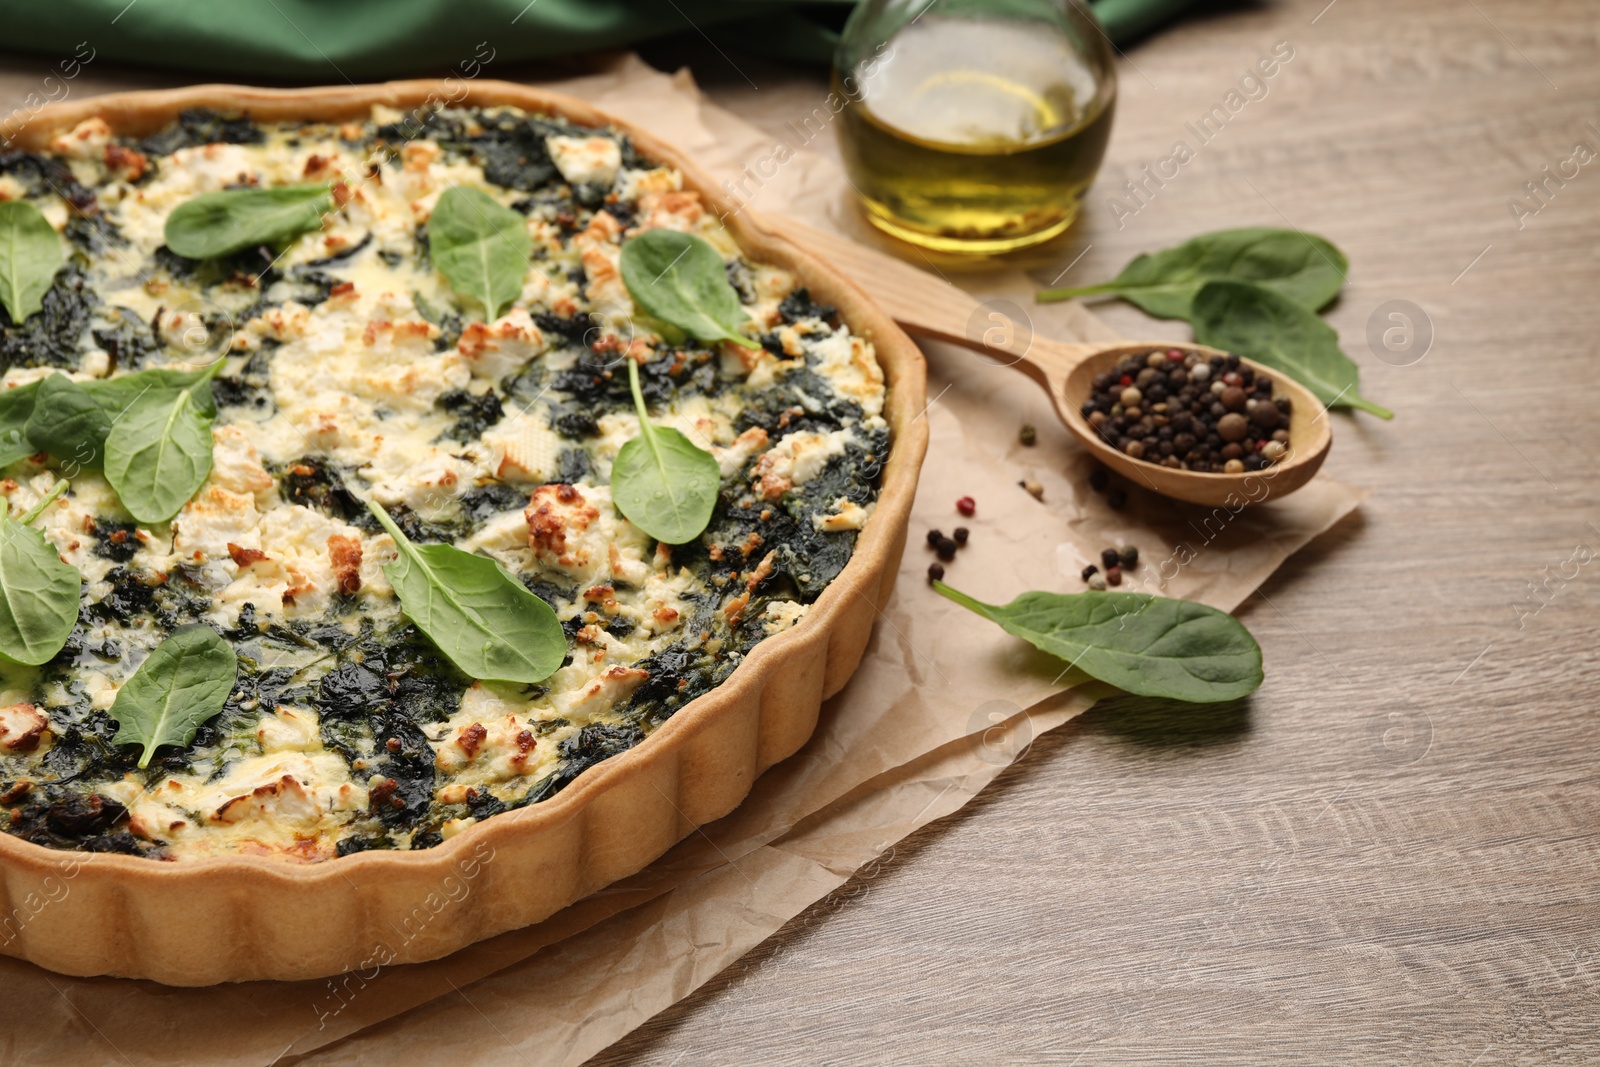 Photo of Delicious homemade quiche, fresh spinach leaves and spices on wooden table